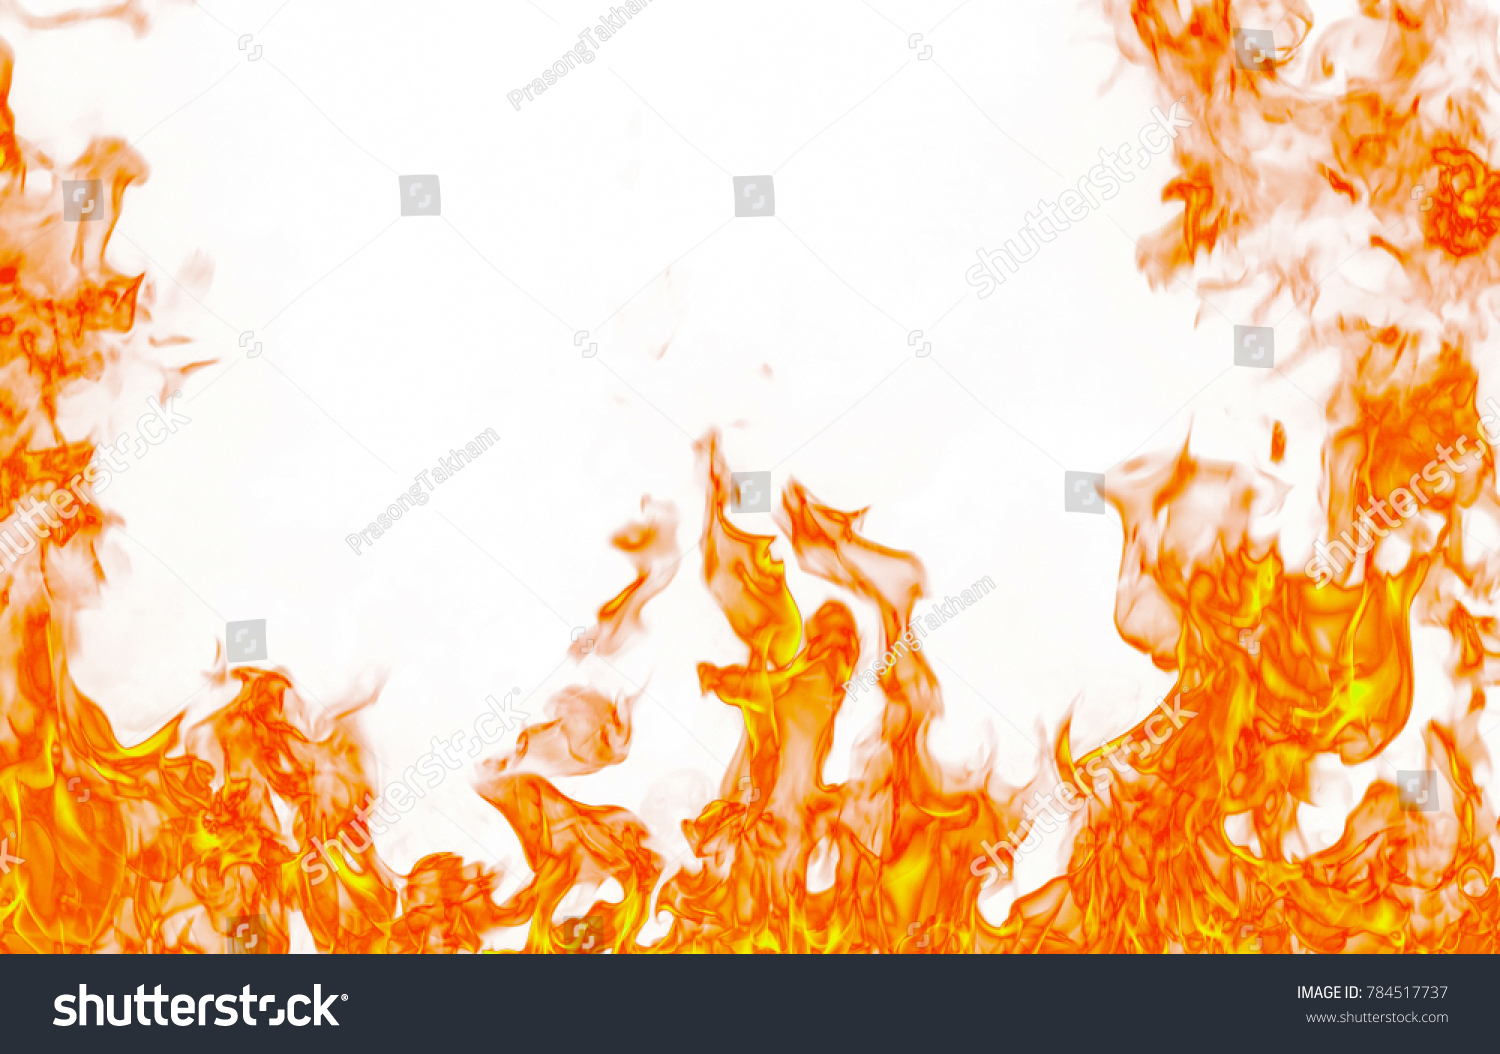 Fire Flames Isolated On White Background Stock Photo Edit Now 784517737